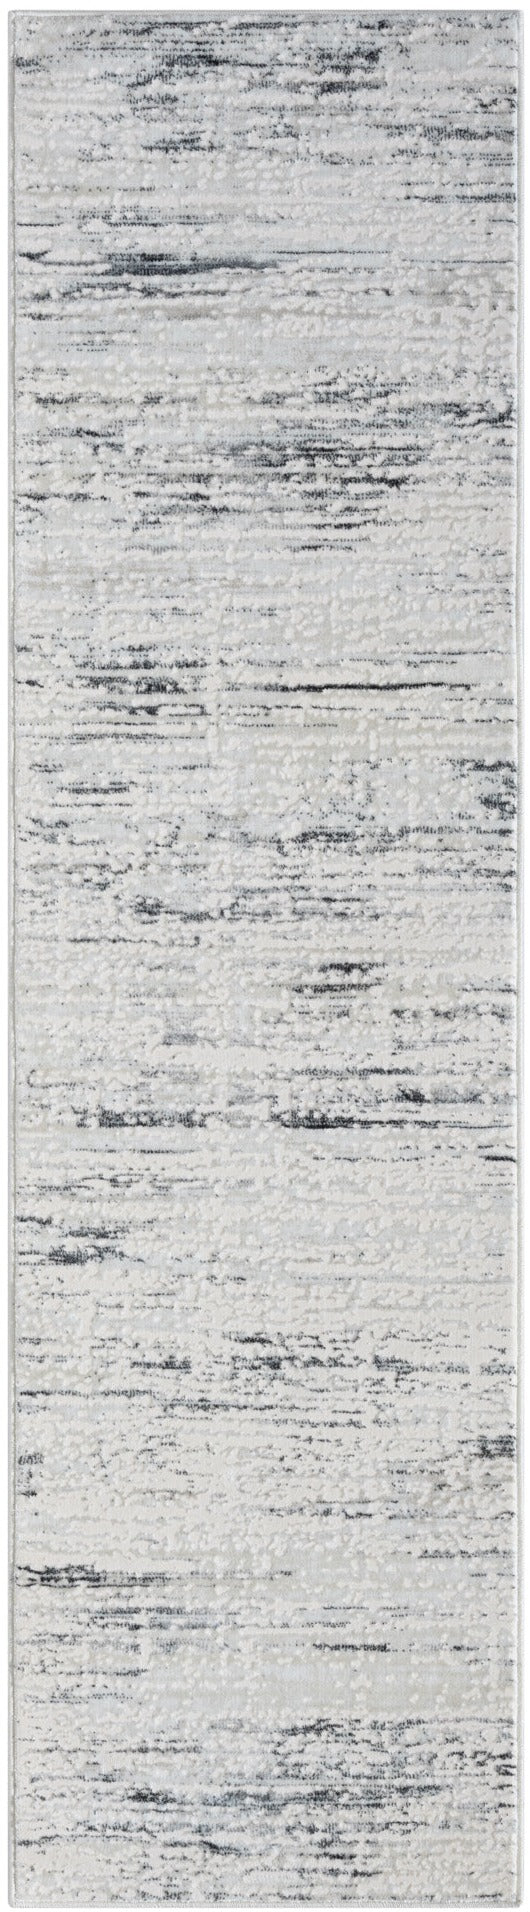 American cover design / Persian weavers Boutique 455 Fossil Rug